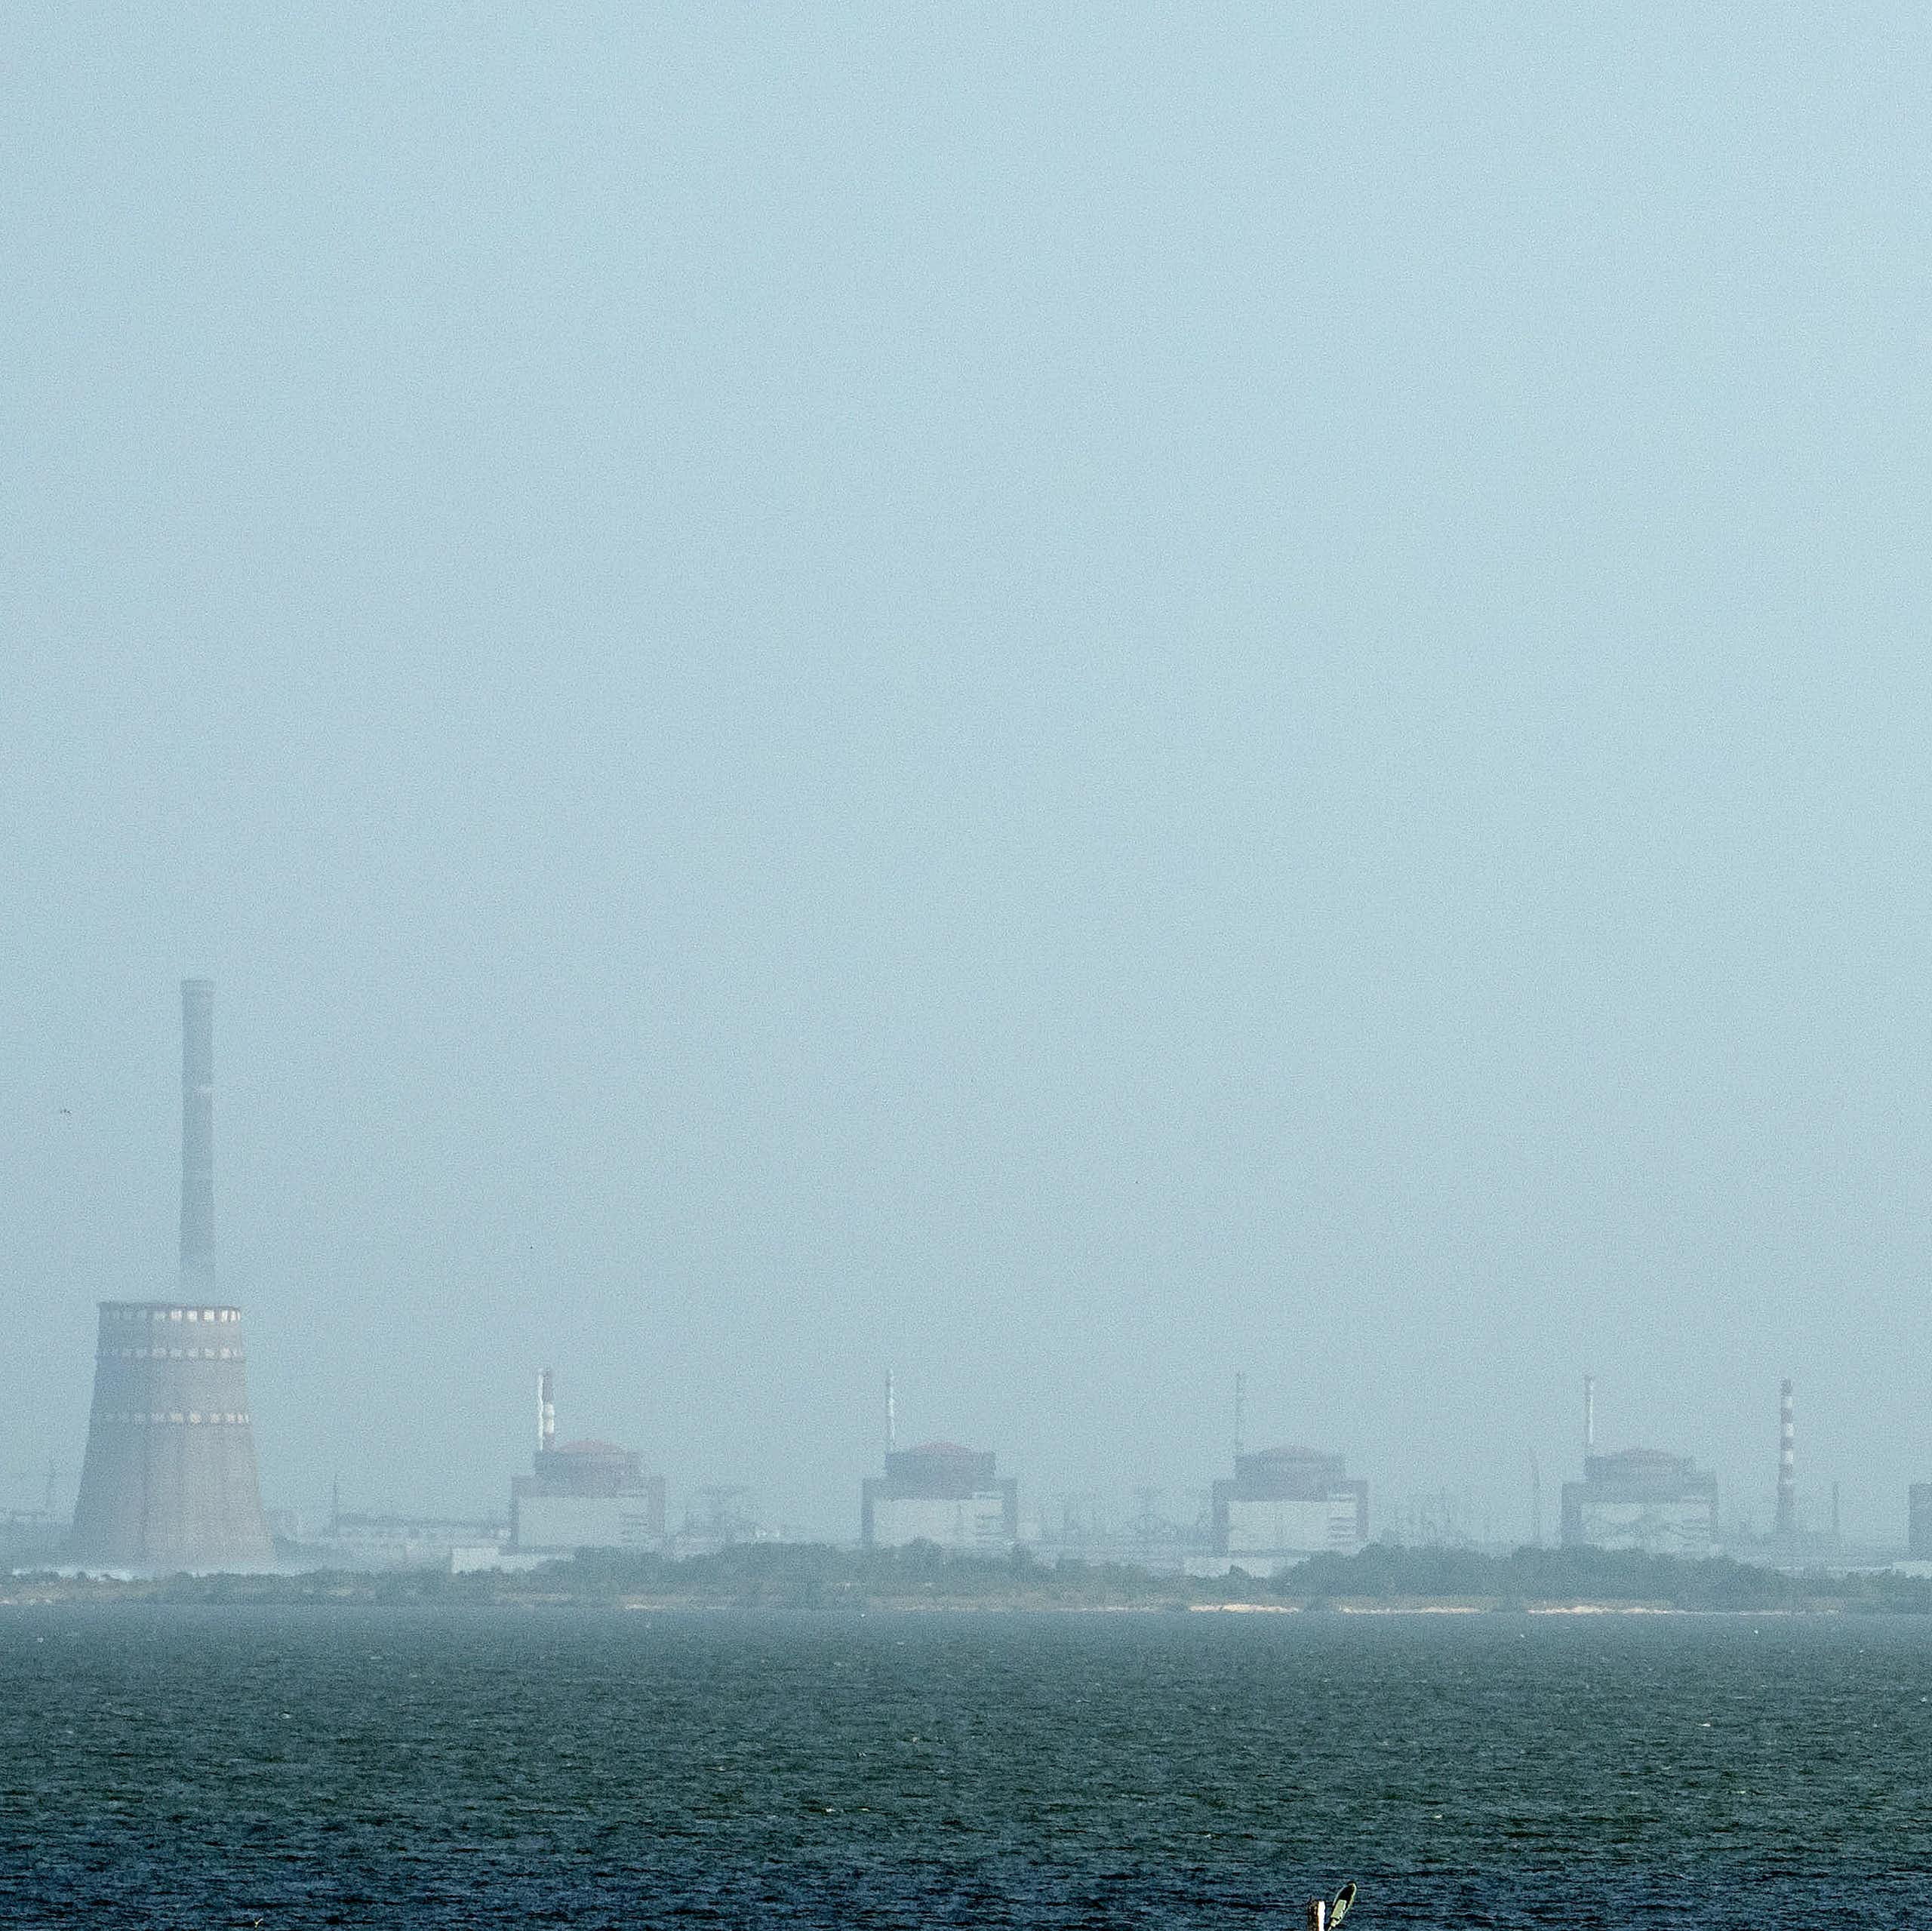 A power plant is seen across a river.